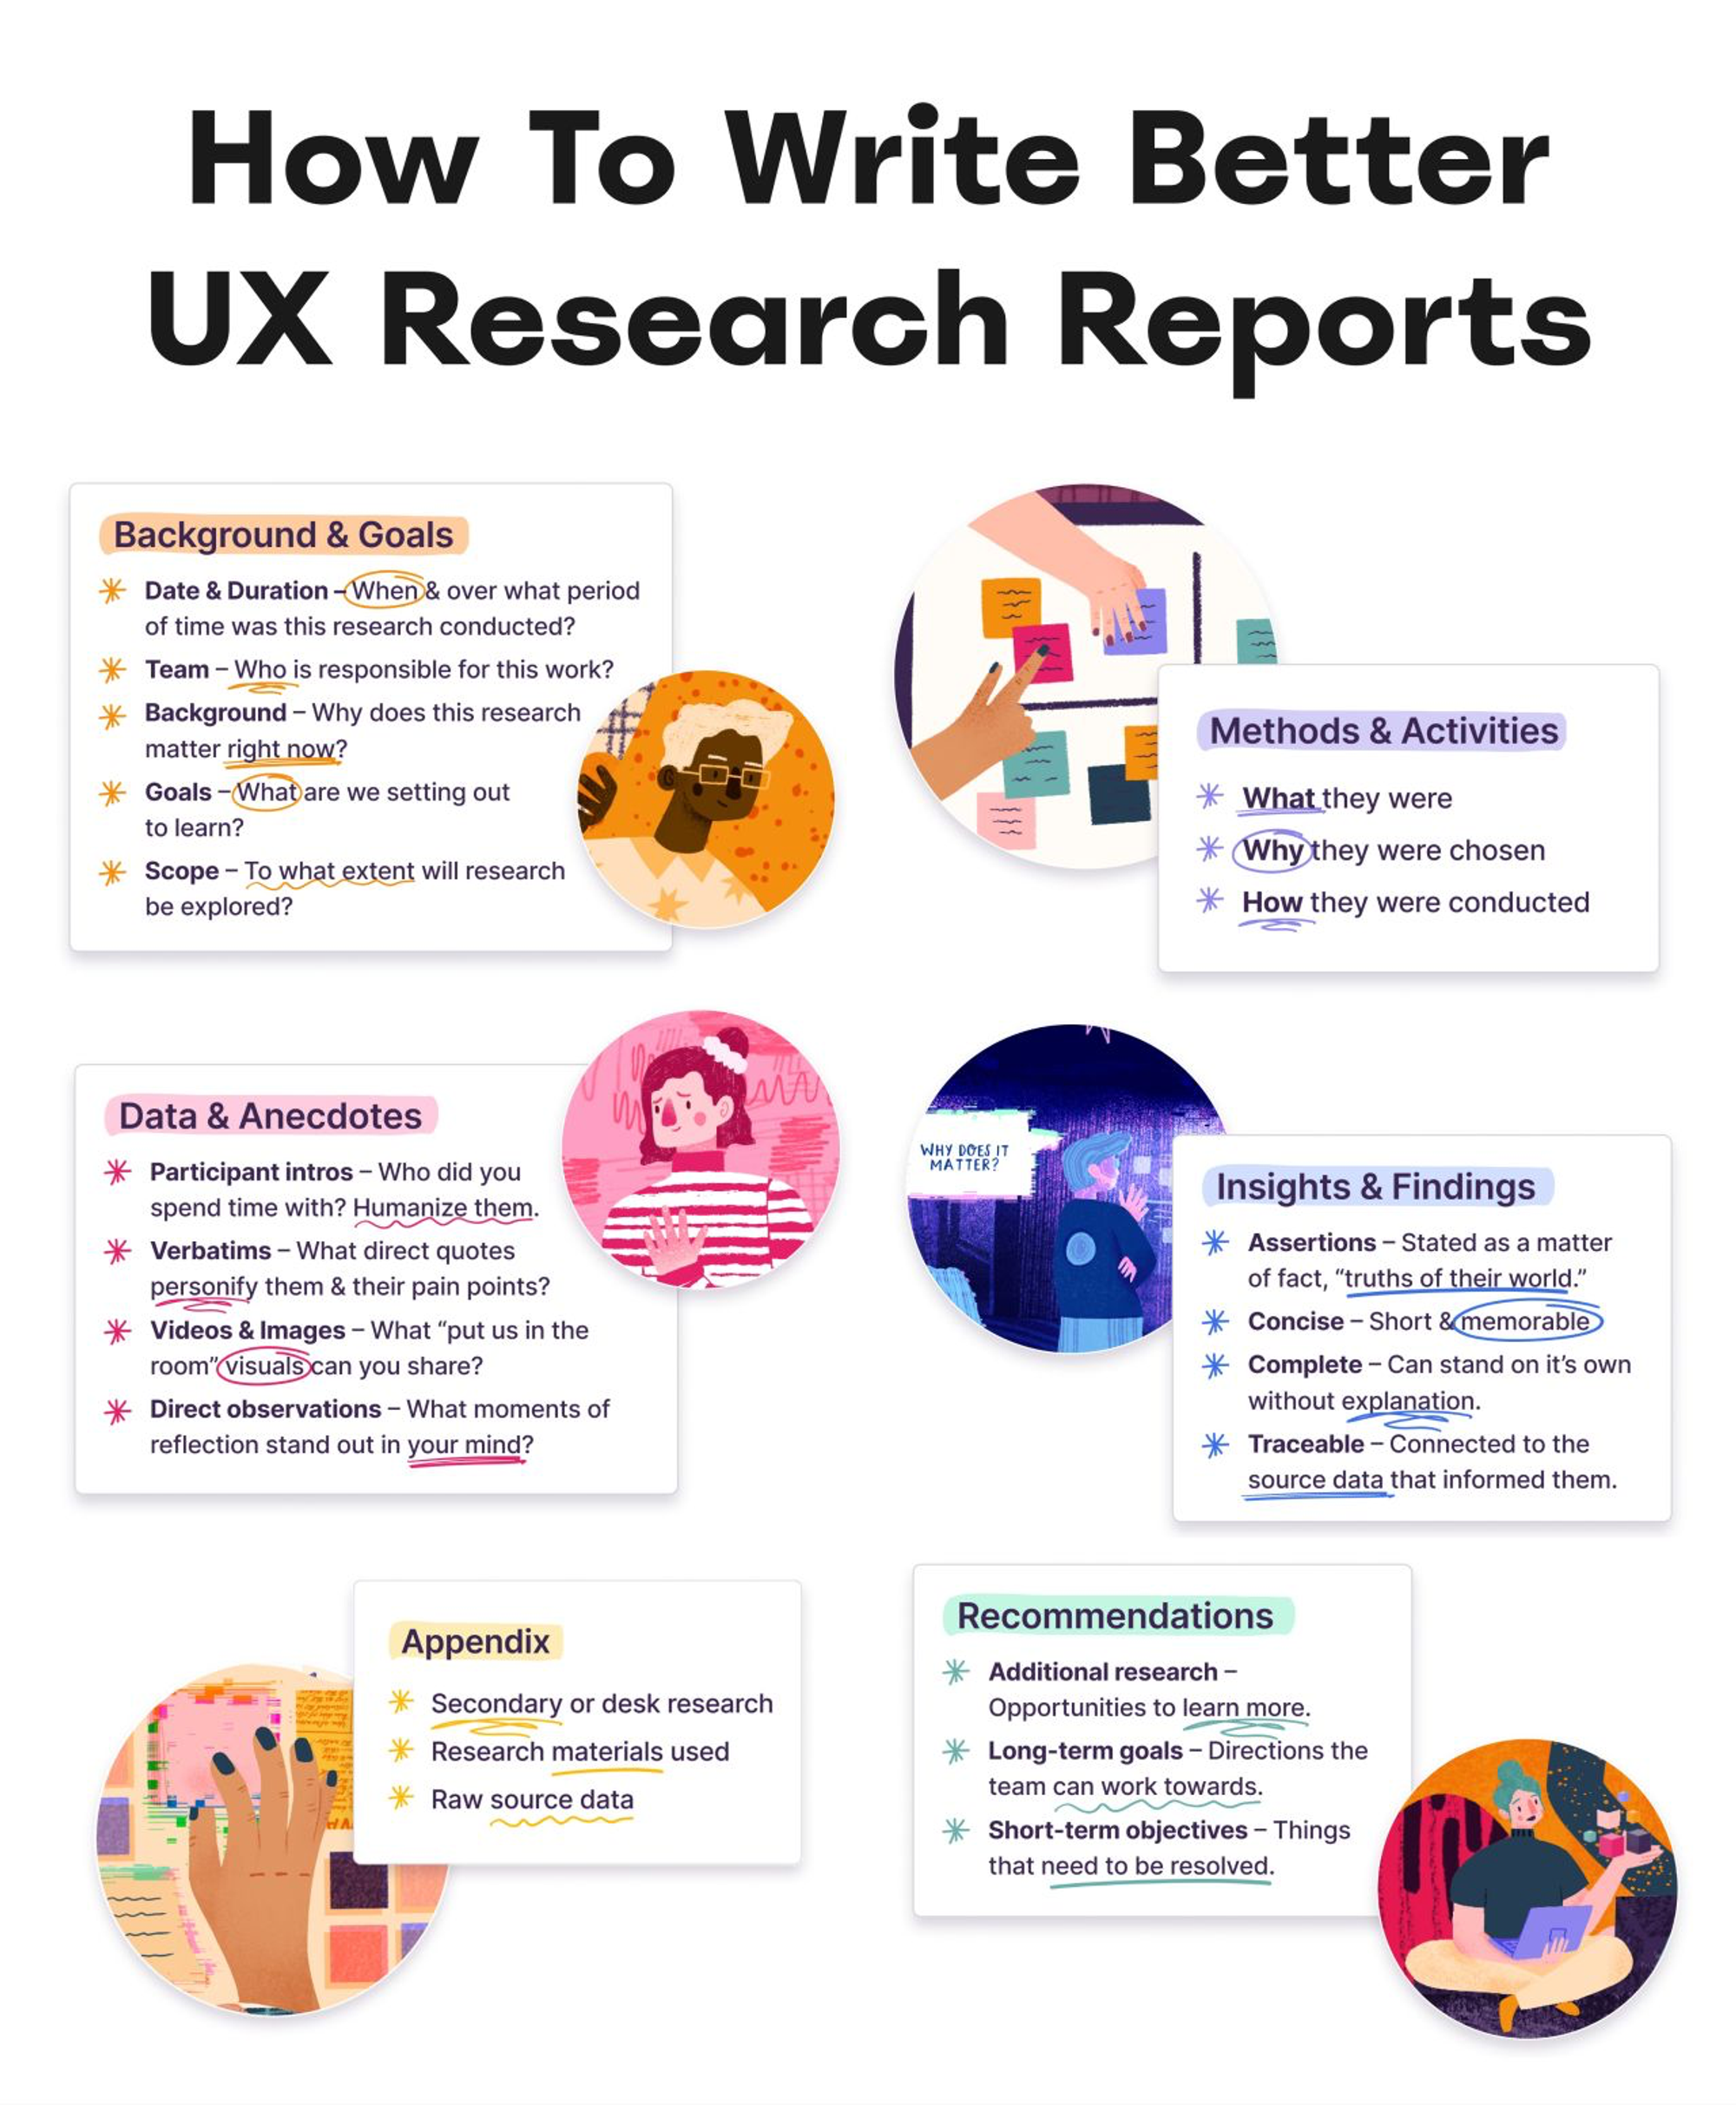 How To Write Better UX Research Reports by Allison Grayce Marshall